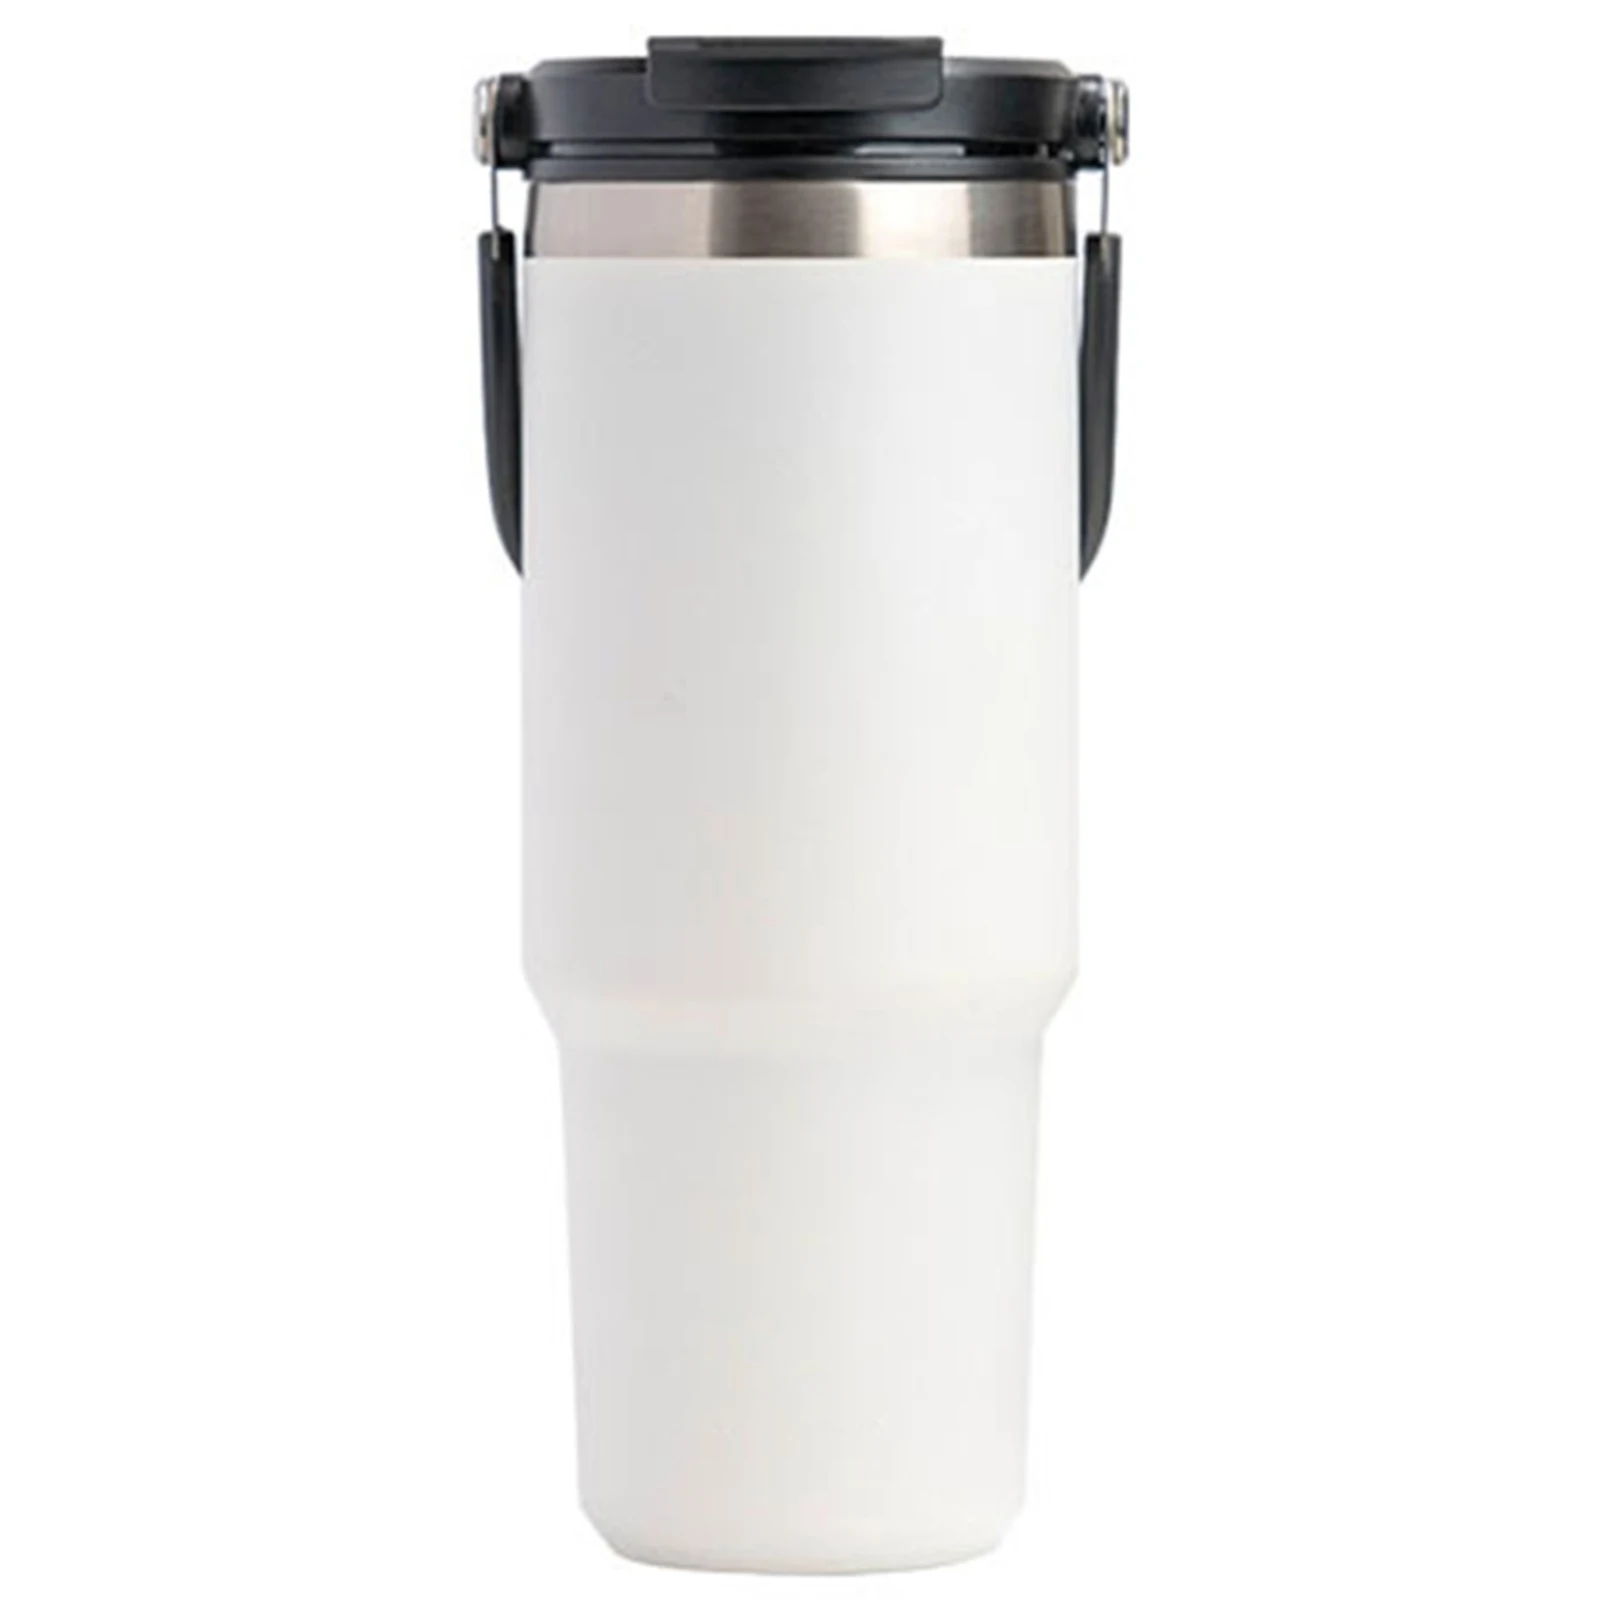 Stainless Steel Insulated Bottle with Mobile Phone Holder Cup Cover for Drinking Coffee Tea Juice J2Y